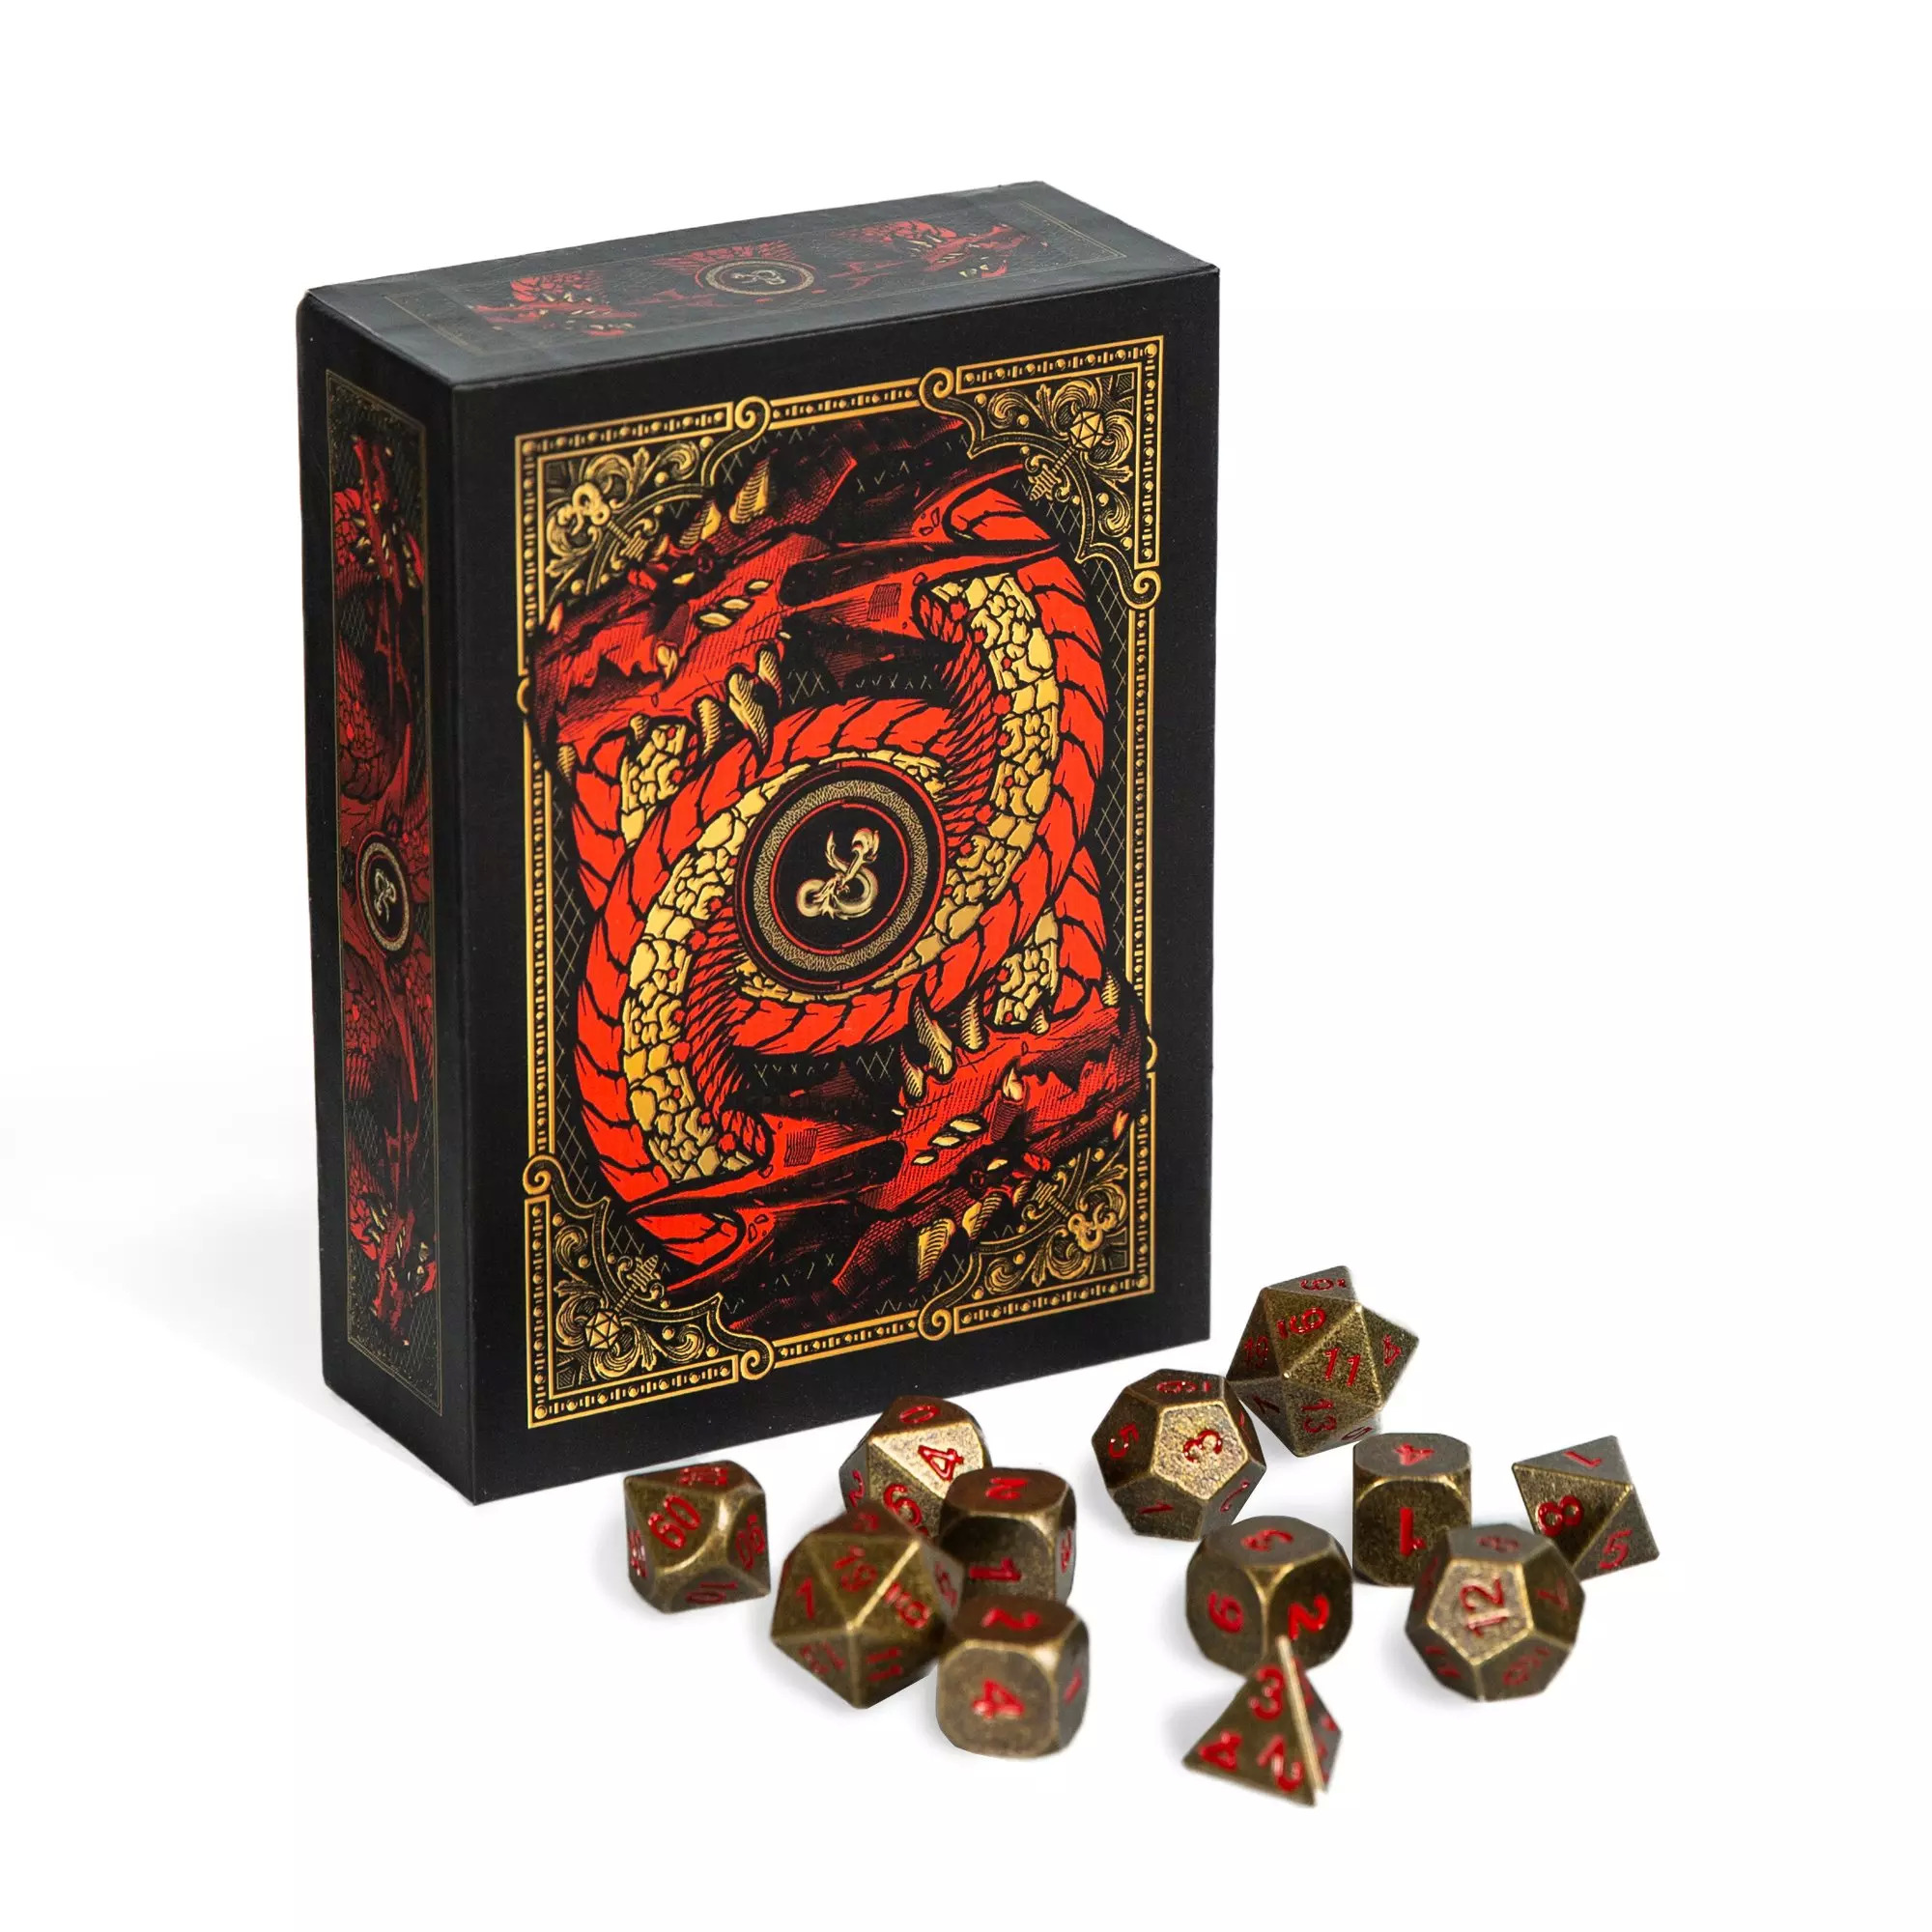 Dungeons and Dragons 12 Dice and Tray - $13.29 at GameStop